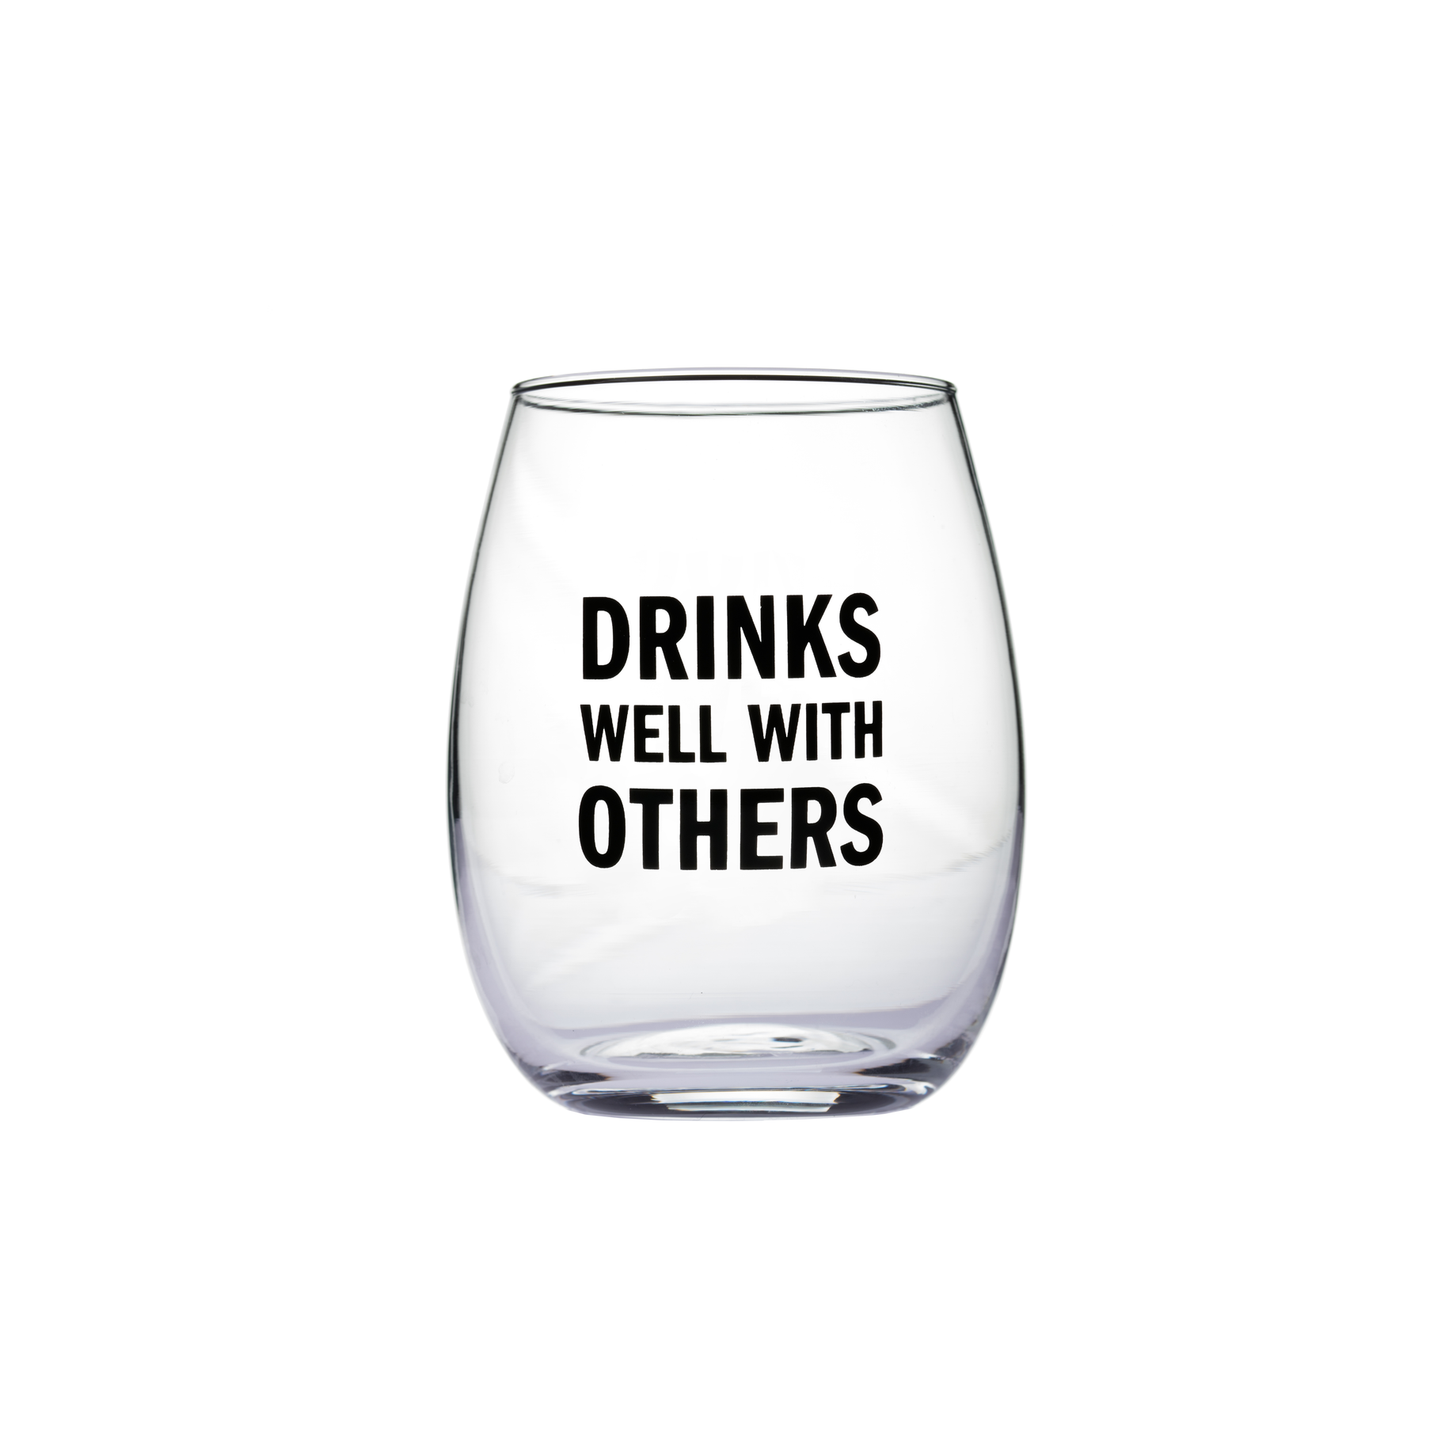 "Drinks Well With Others" Stemless Wine Glass